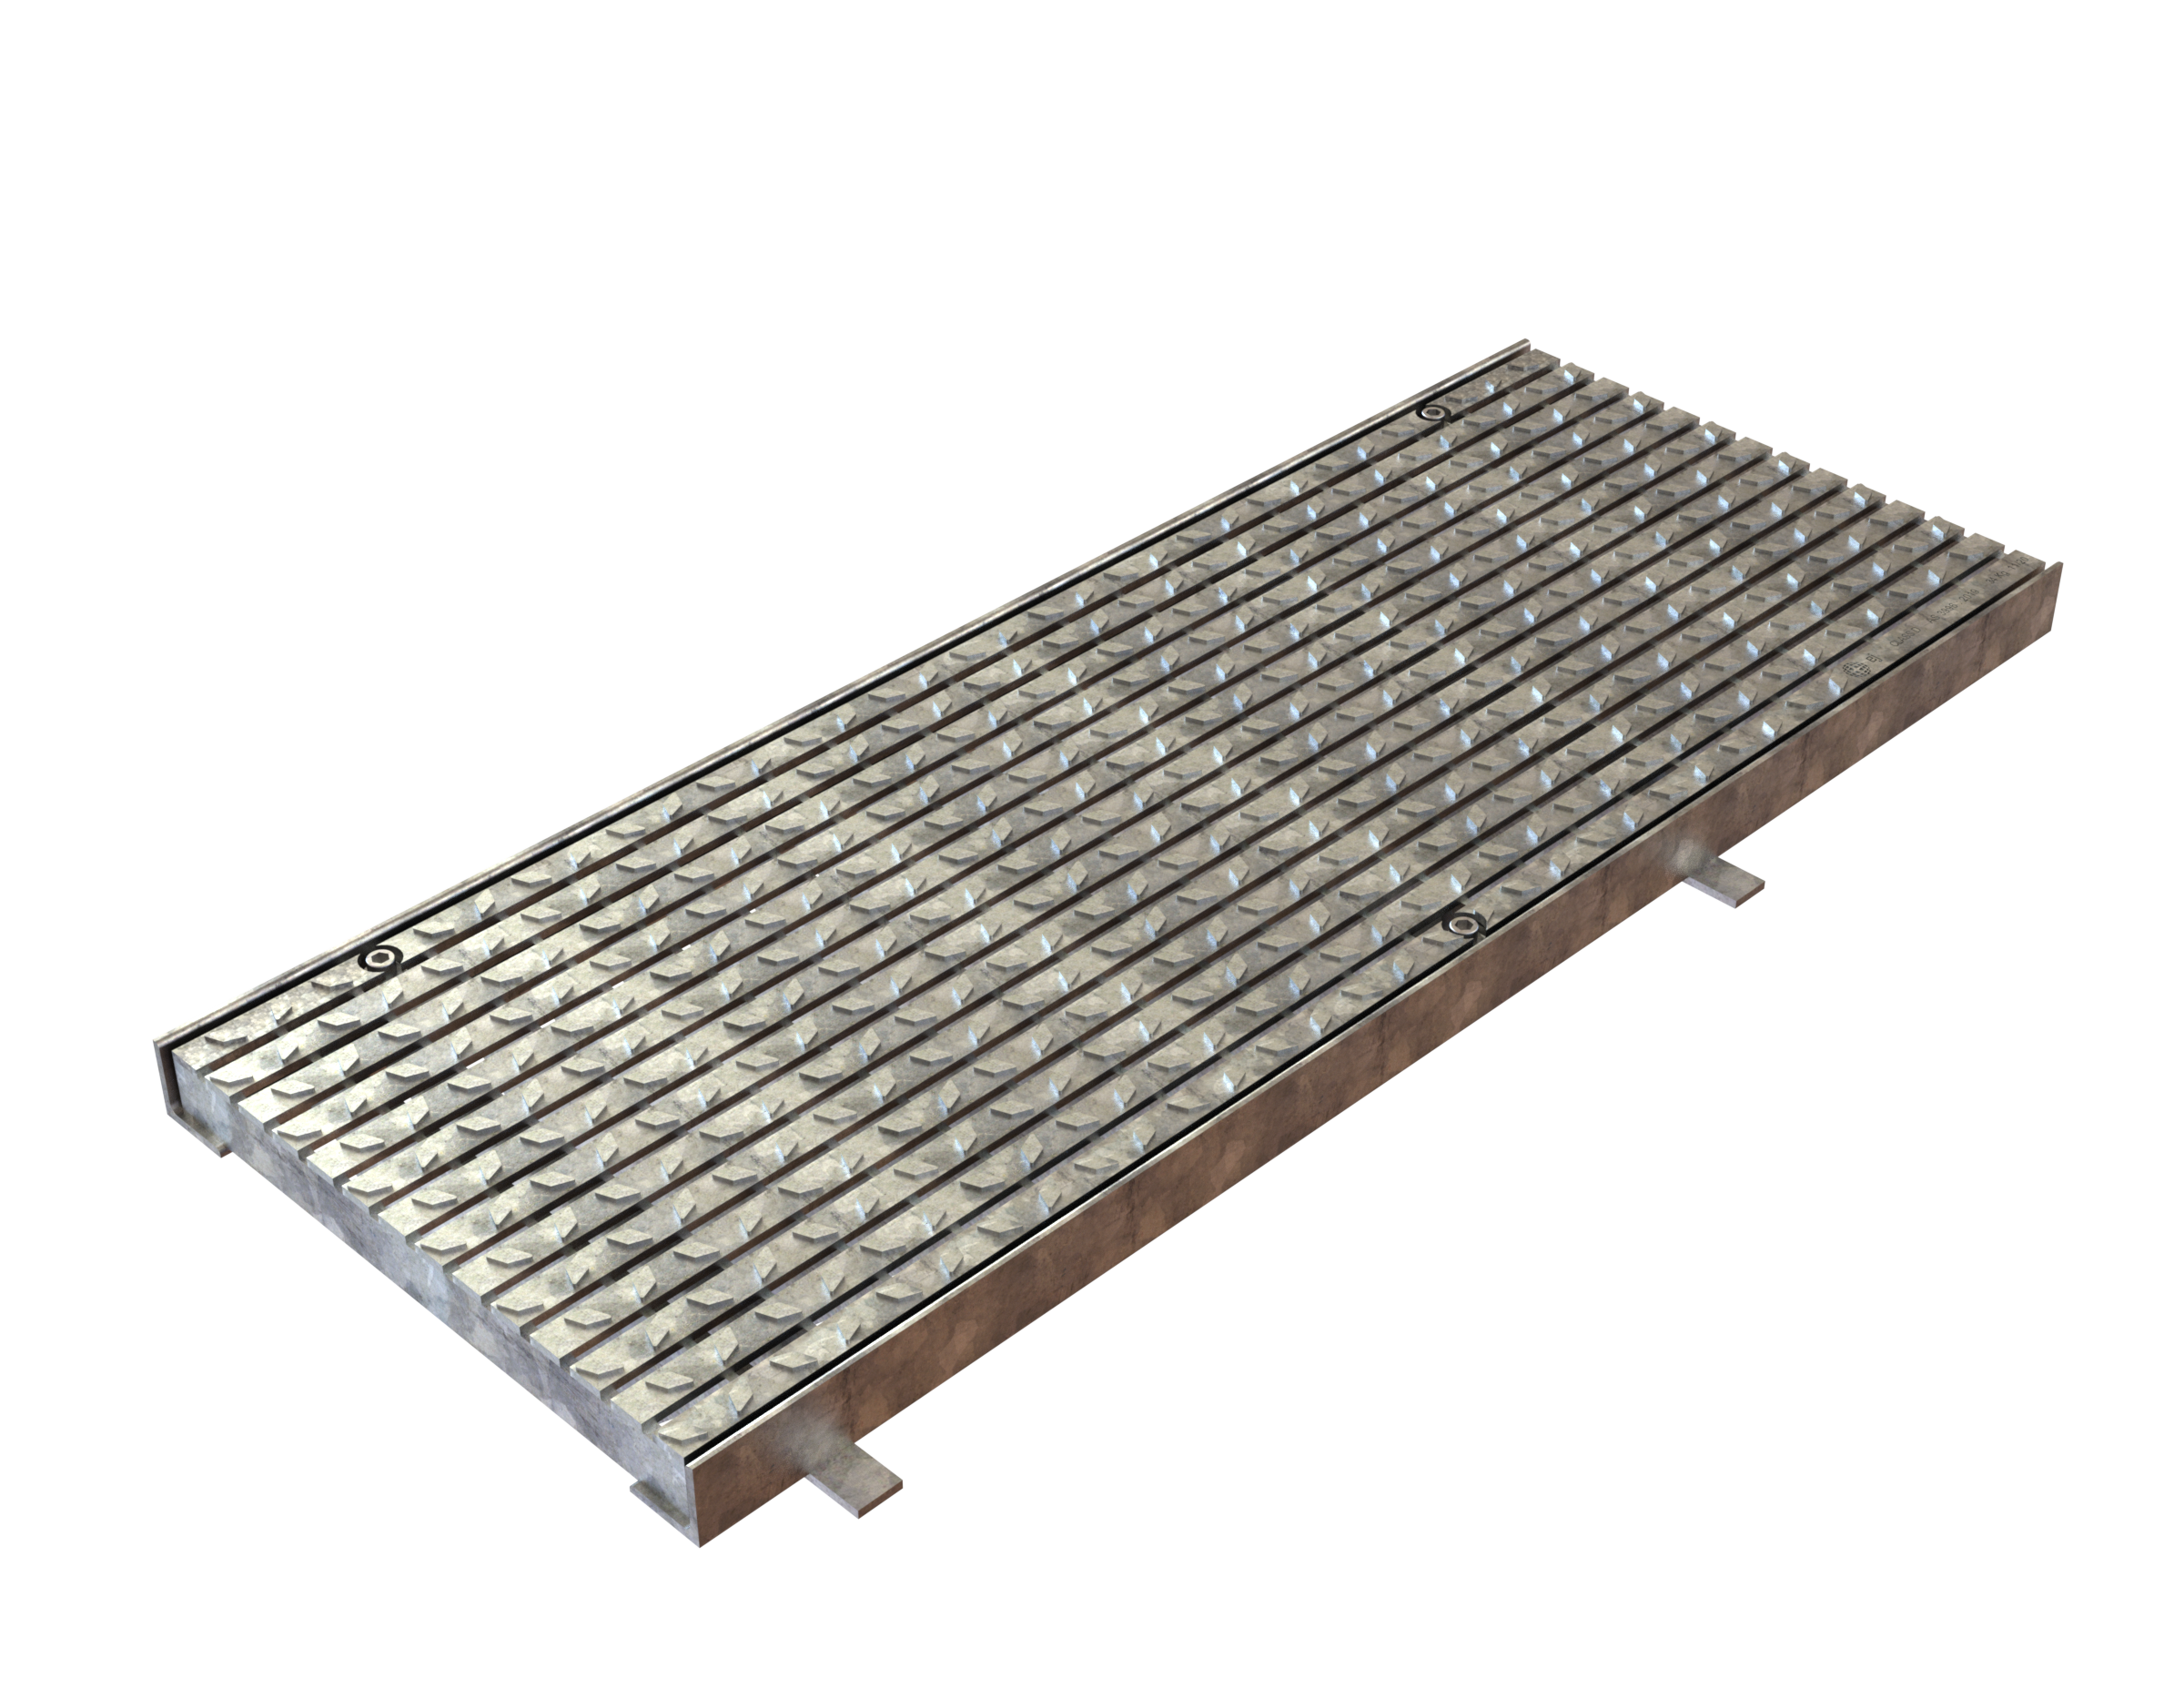 Standard / Heel Proof Linear Trench Grating